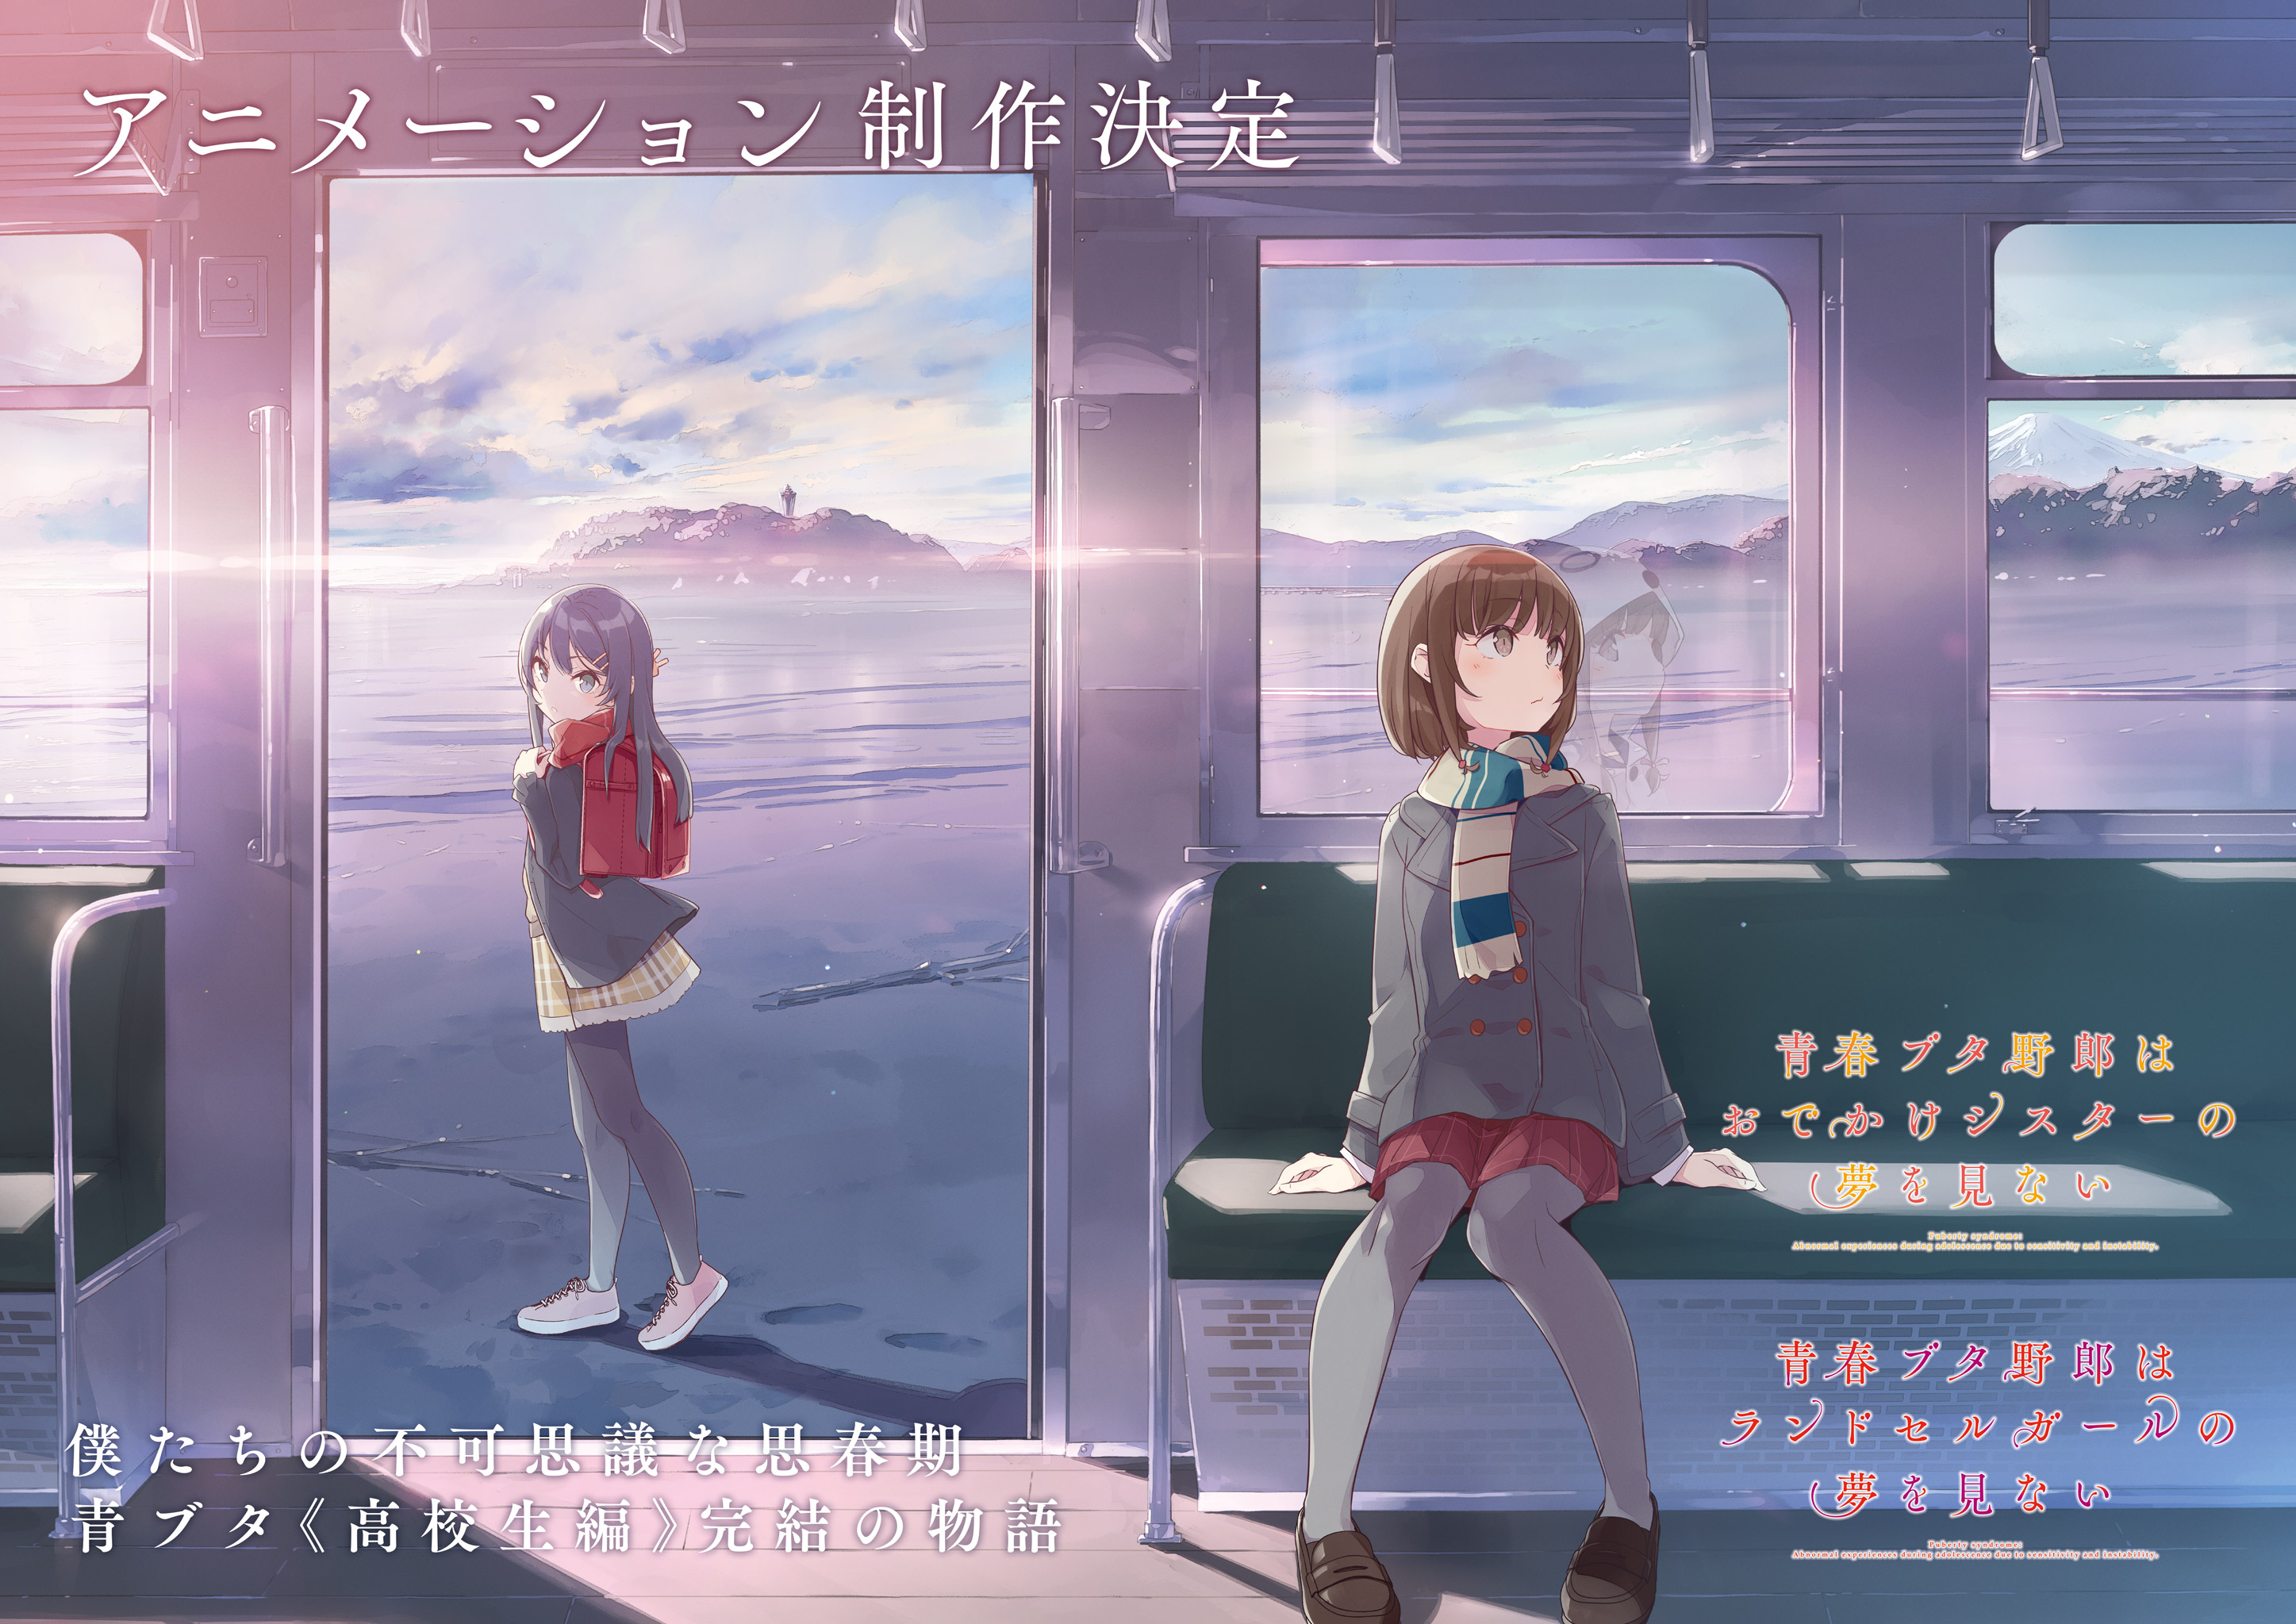 A teaser visual for the upcoming Rascal Does Not Dream of Bunny Girl Senpai theatrical animation featuring Kaede Asuzagawa riding a train by the sea side and a young girl wearing a red elementary school knapsack on her back walking along the shore.